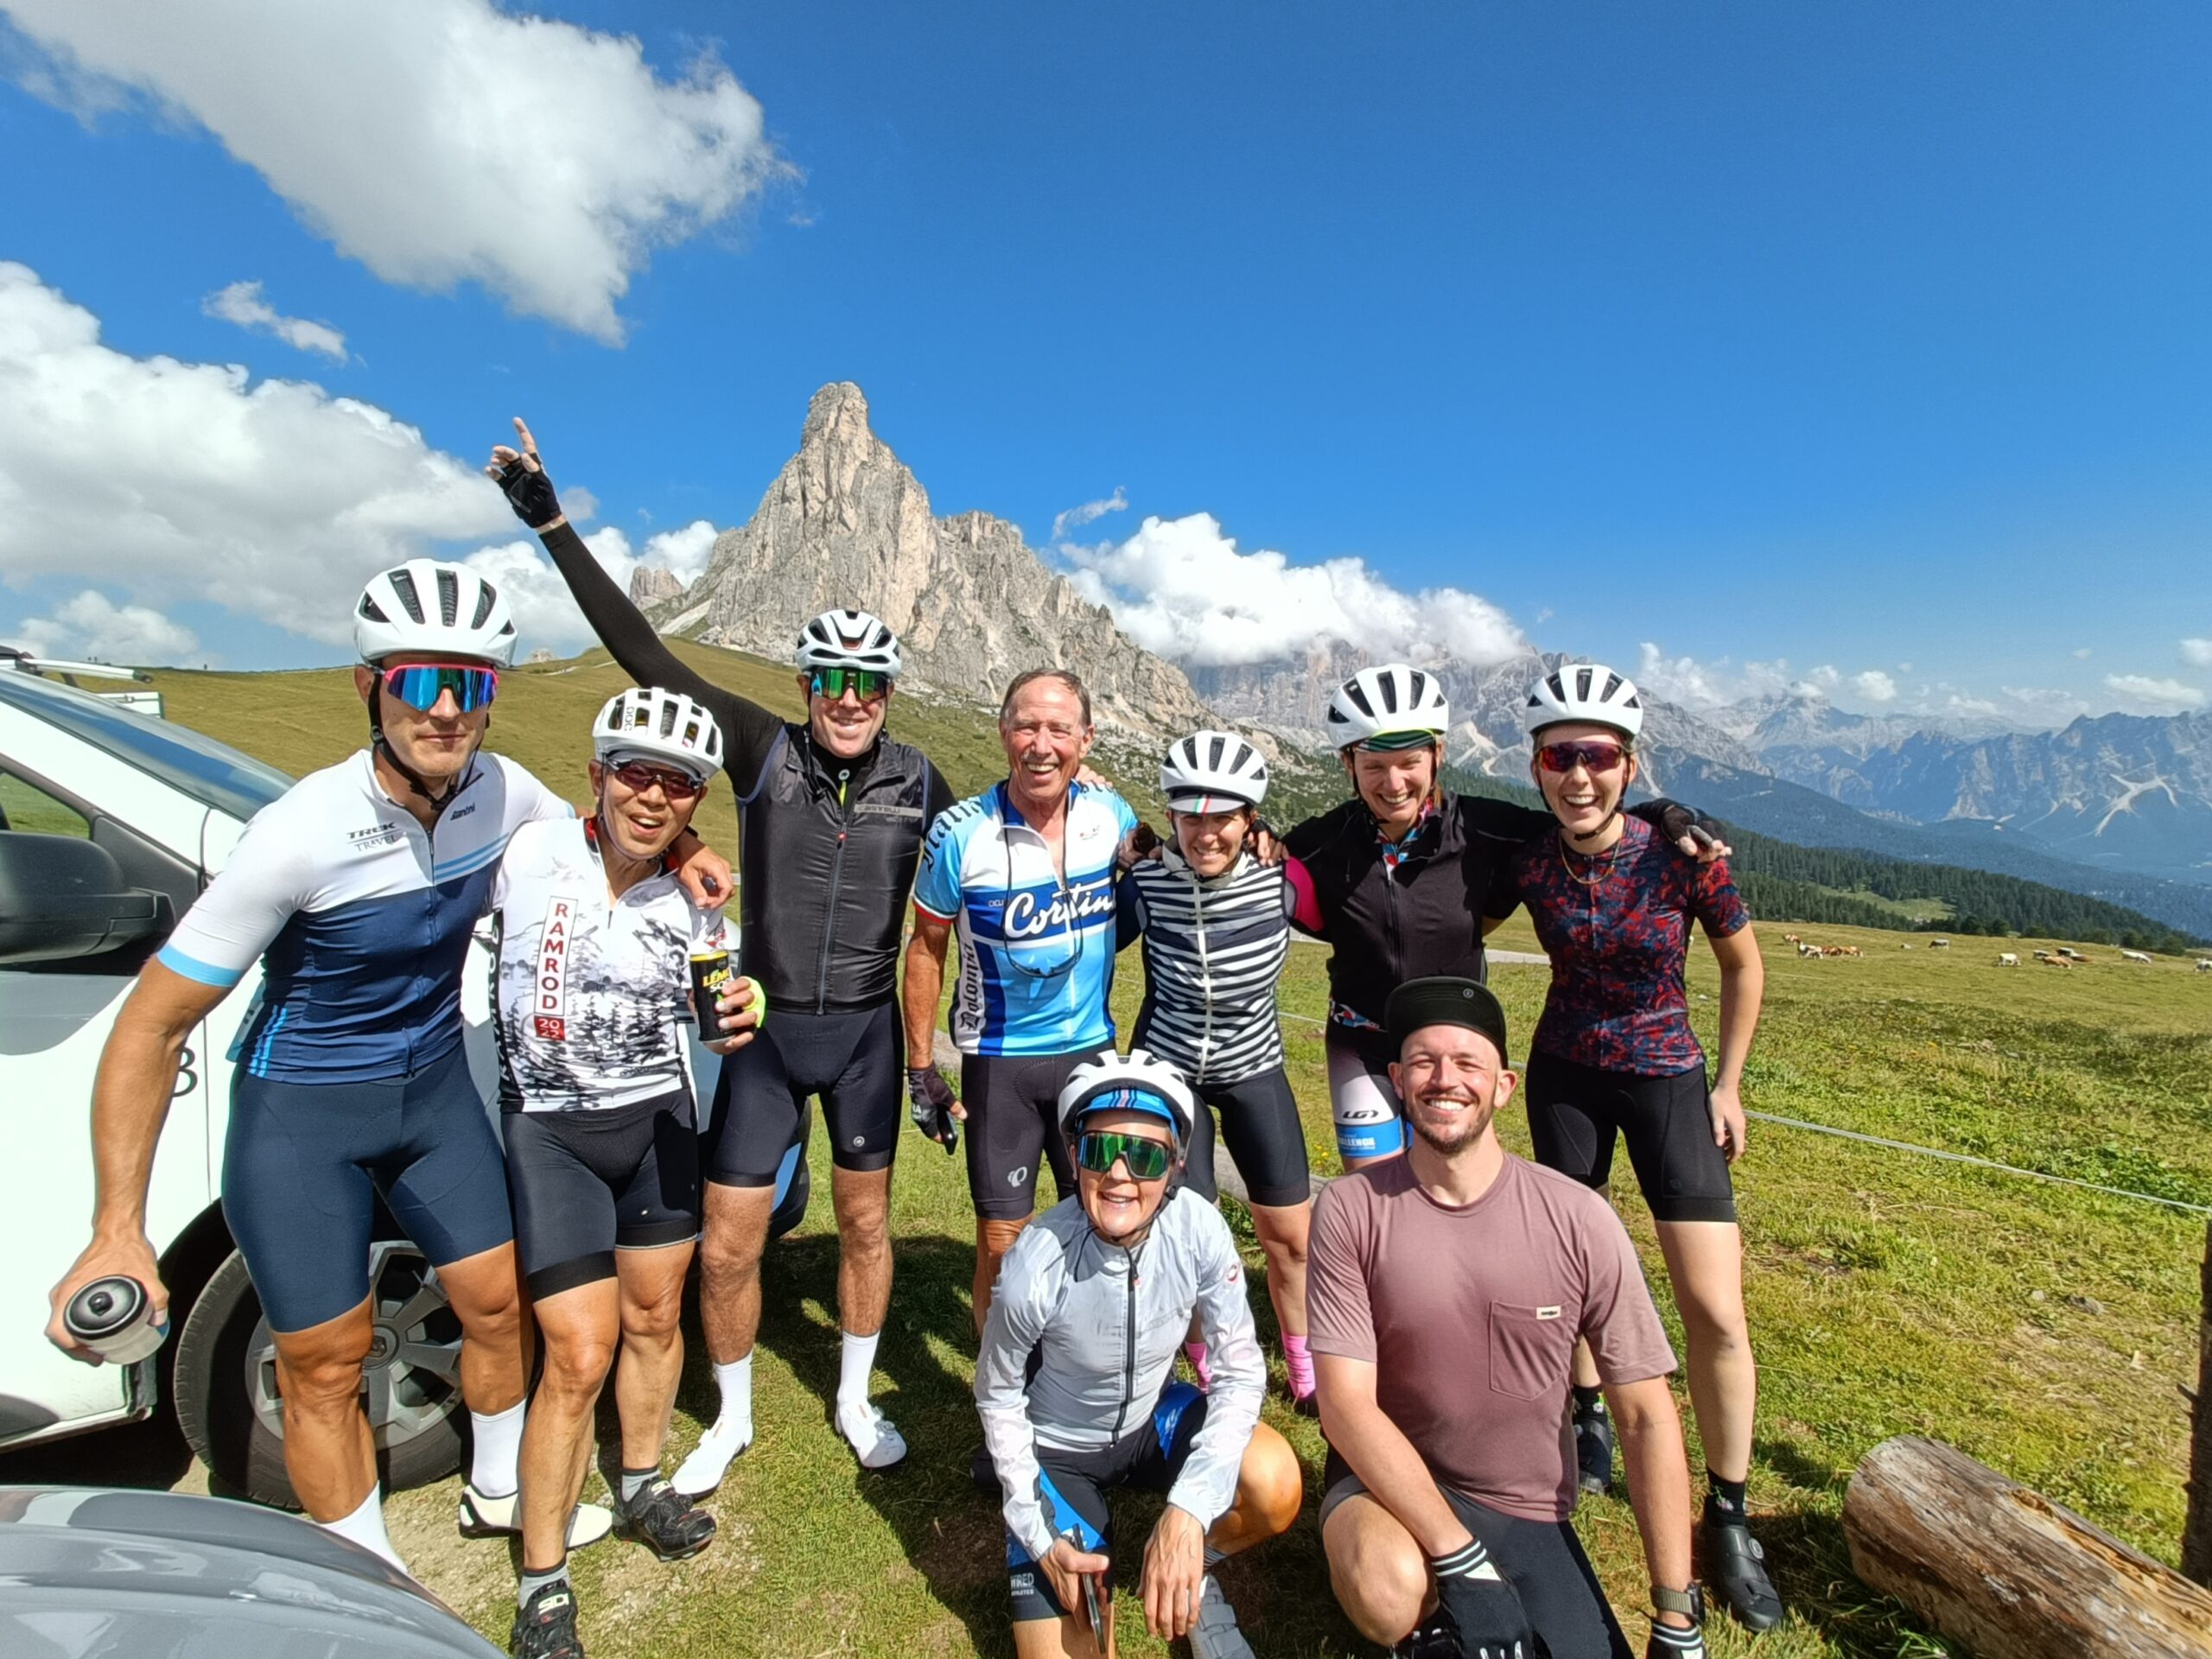 A group of cyclists pose and smile with mountain peaks in the background